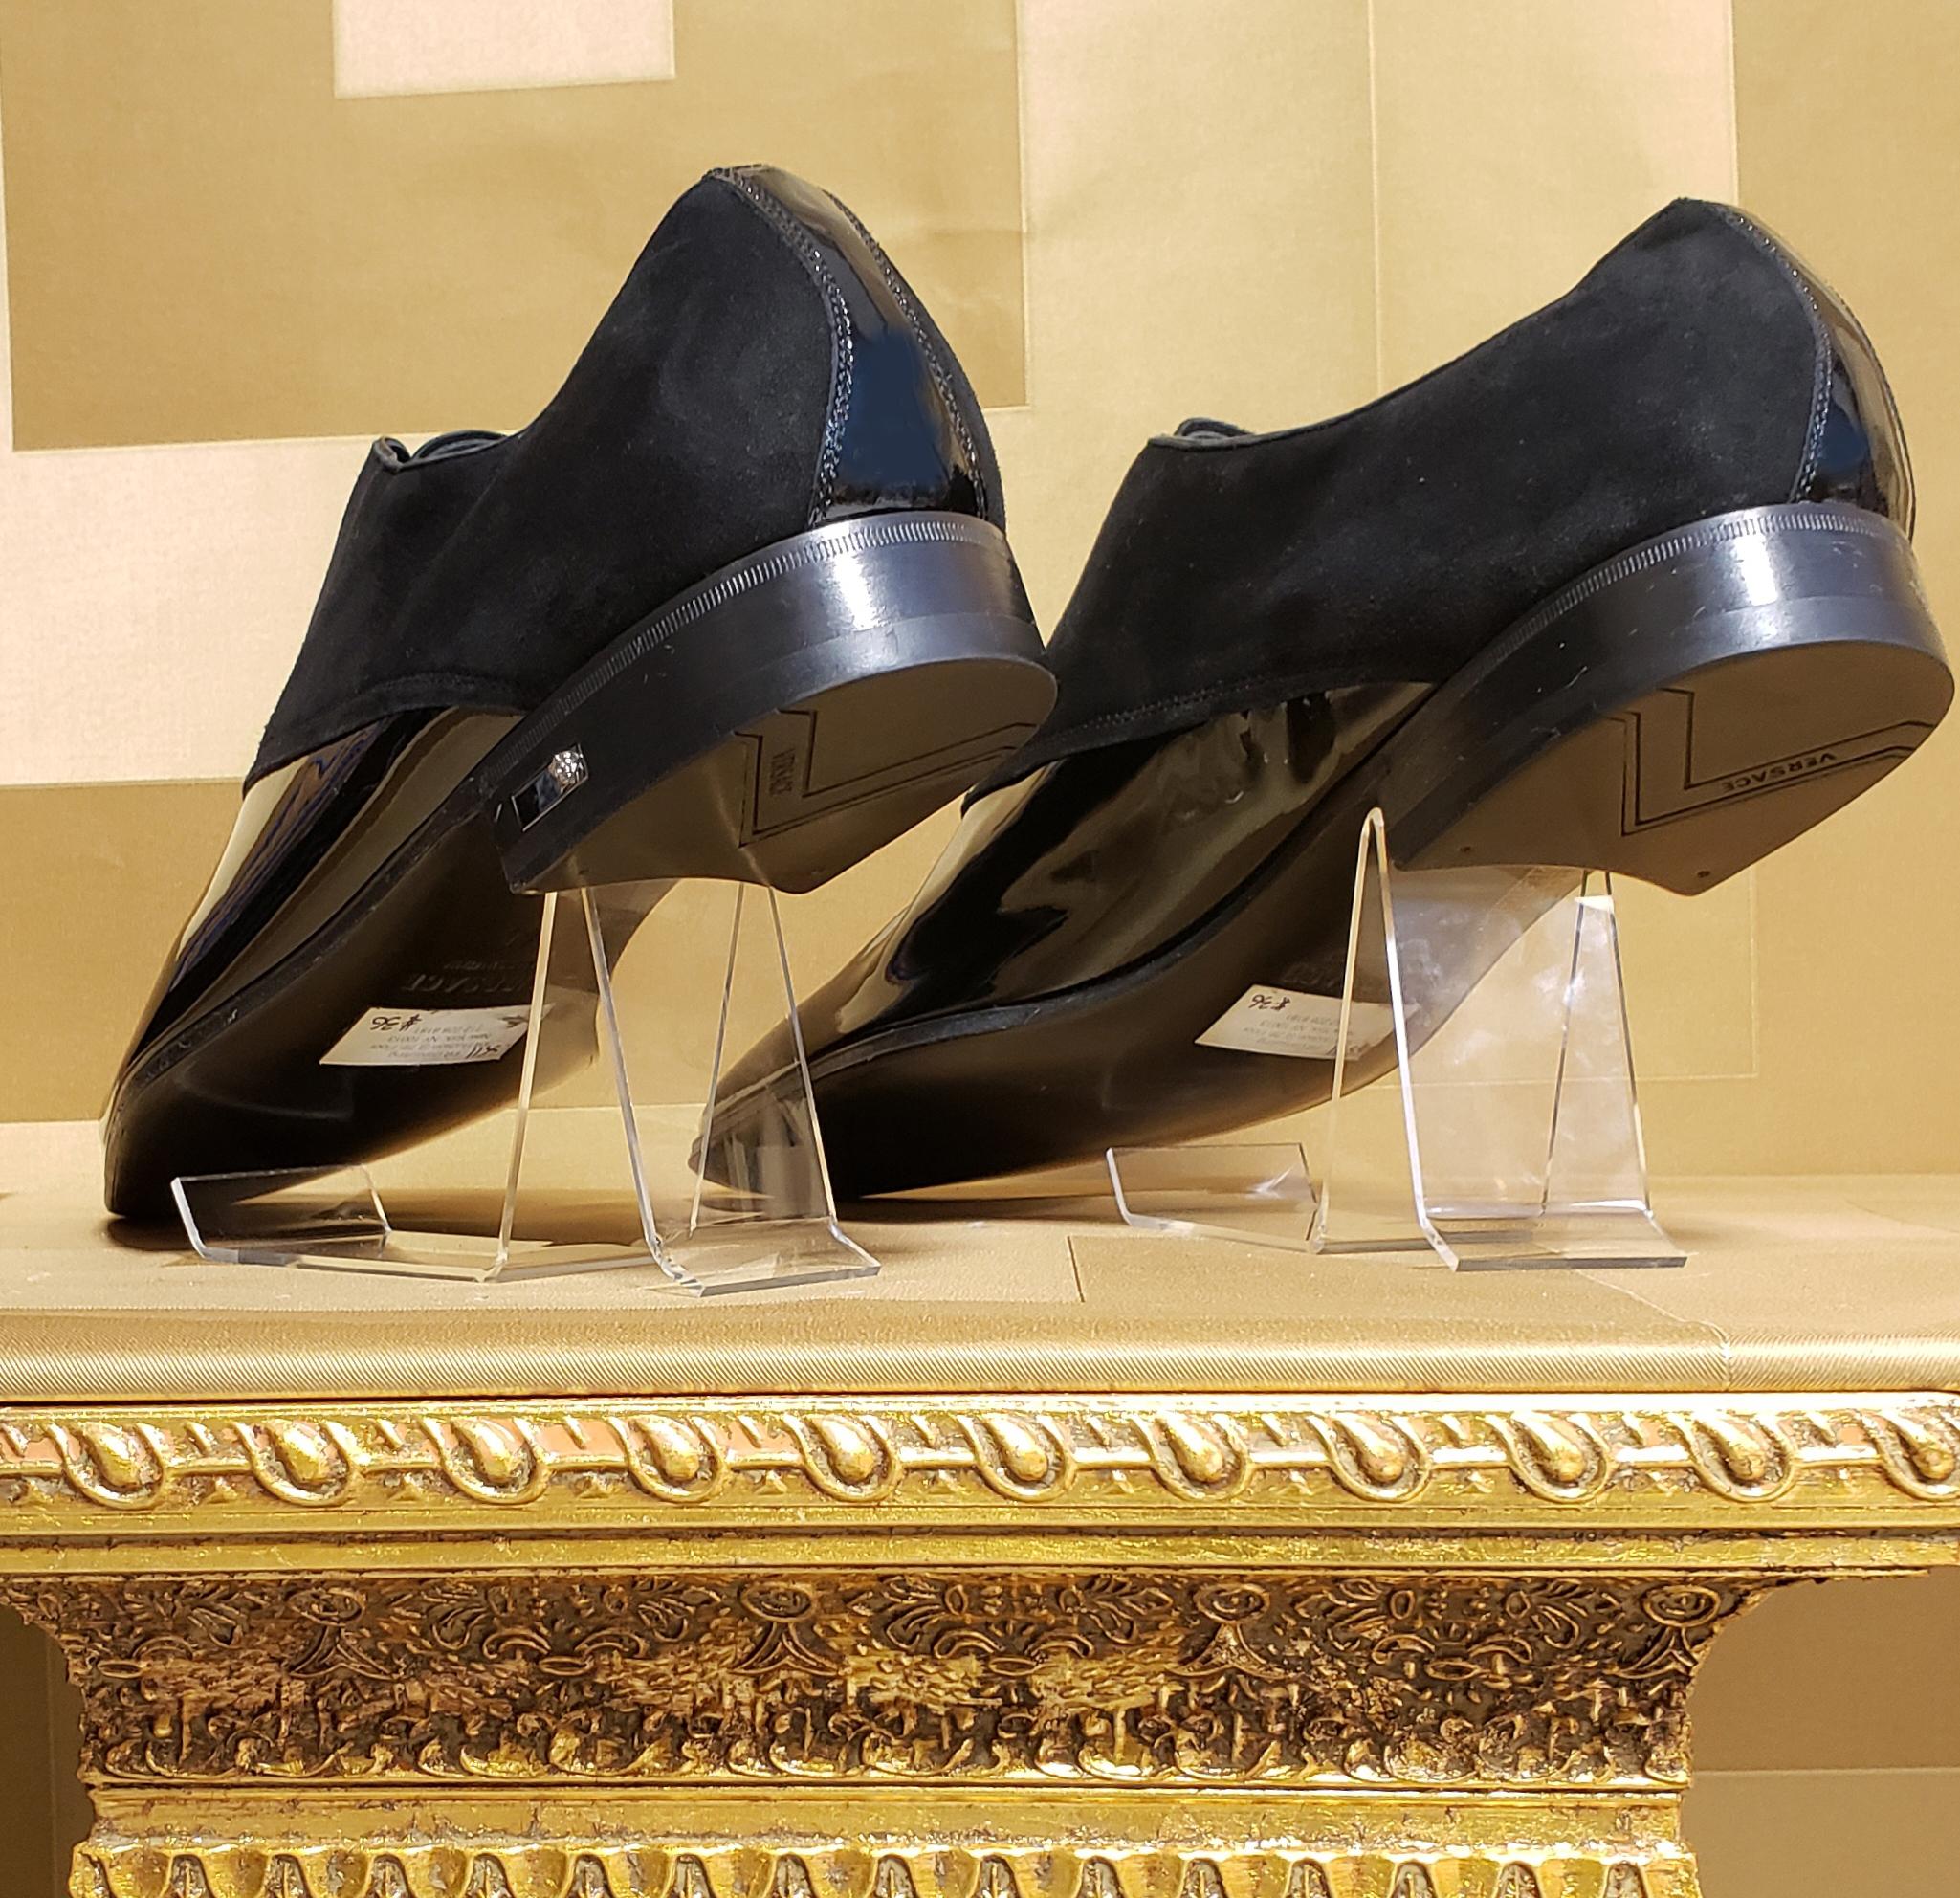 Men's S/S 2011 look # 36 NEW VERSACE BLACK PATENT LEATHER LOAFER with SUEDE 44 - 11 For Sale